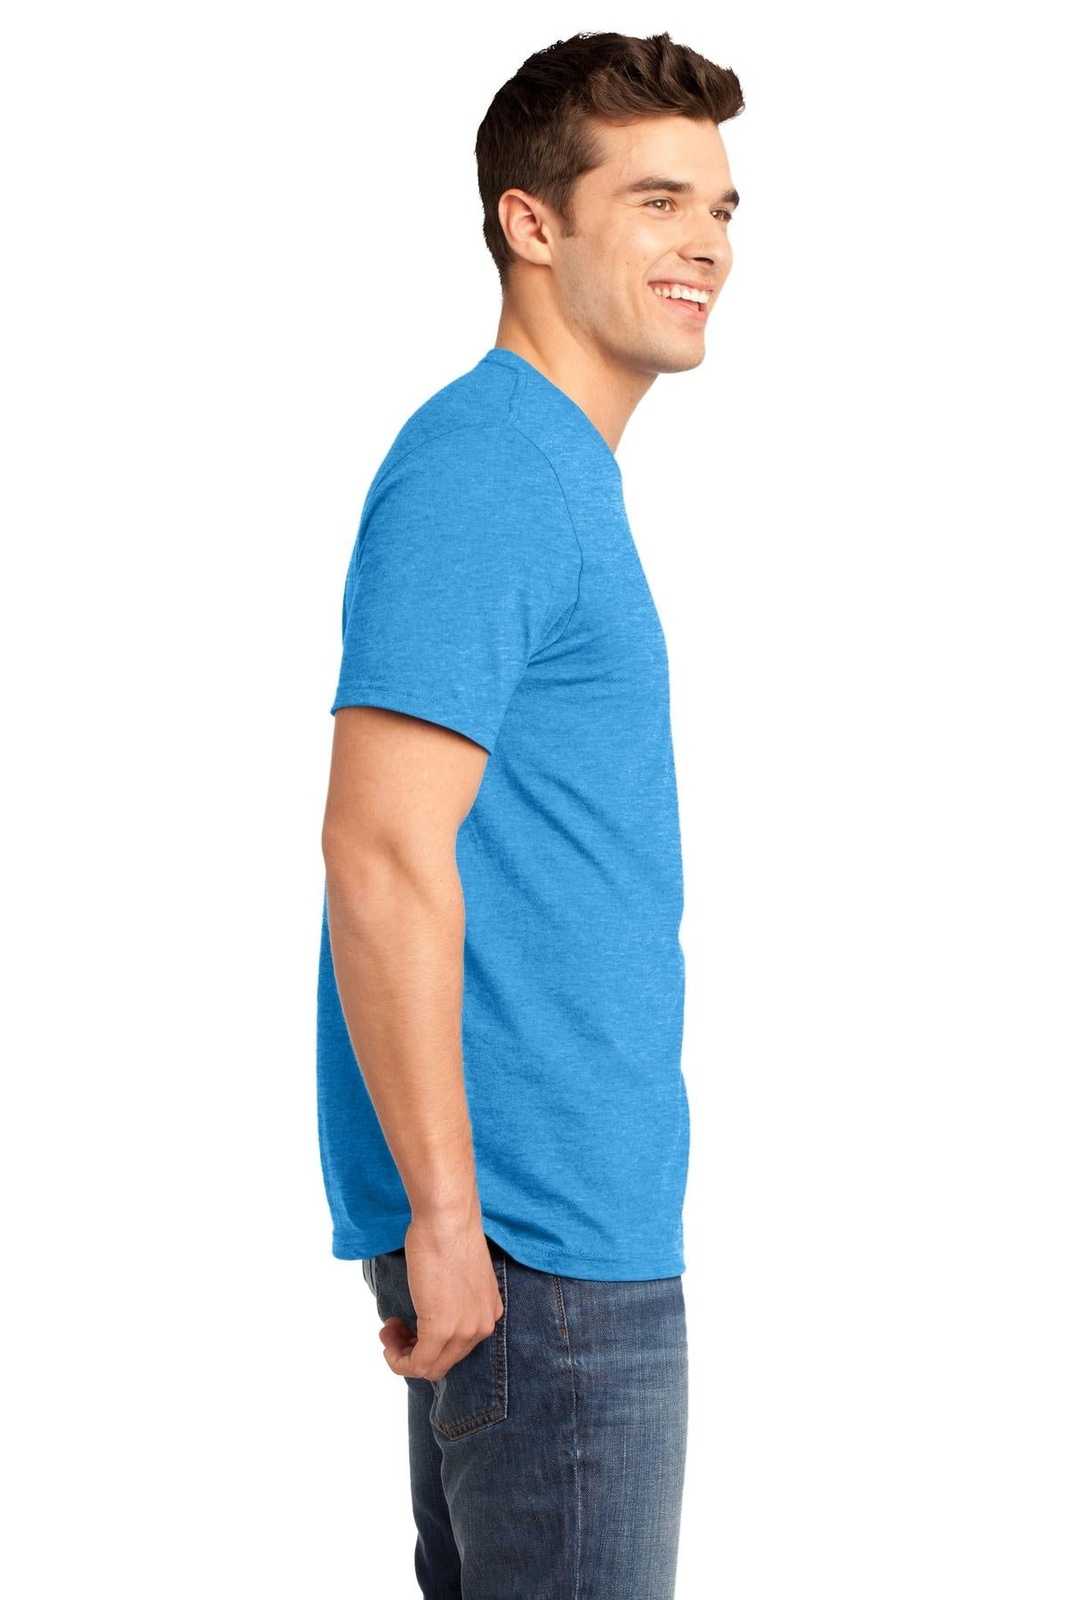 District DT6000 Very Important Tee - Heathered Bright Turquoise - HIT a Double - 3